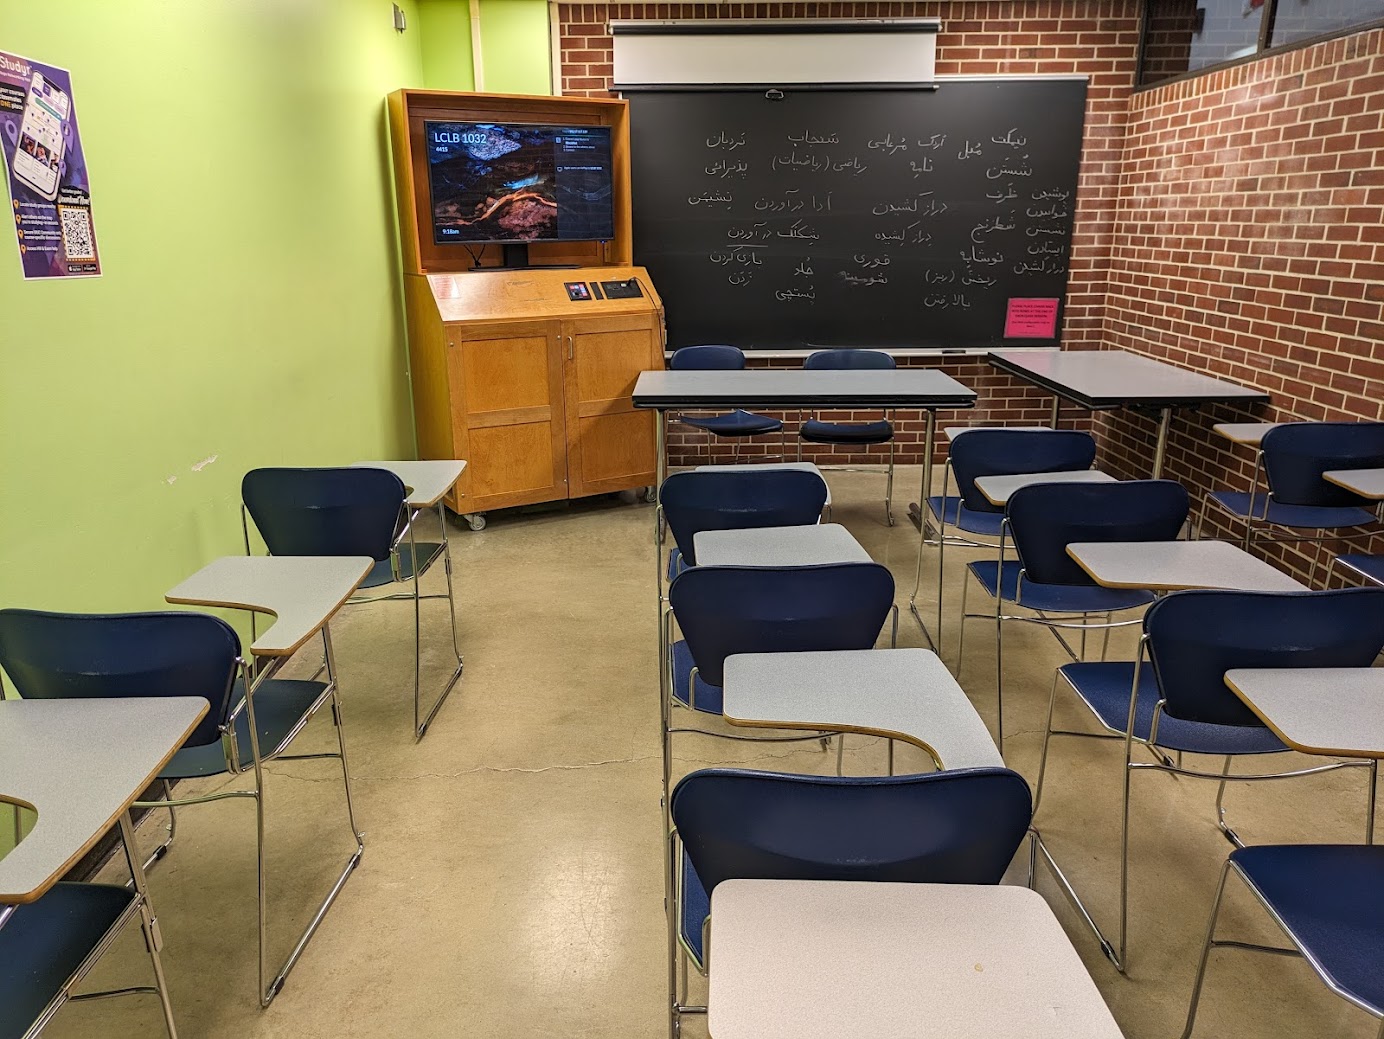 A view of the classroom with movable tableted arm chairs, chalk board, LCD monitor in cabinet, and instructor table in front.